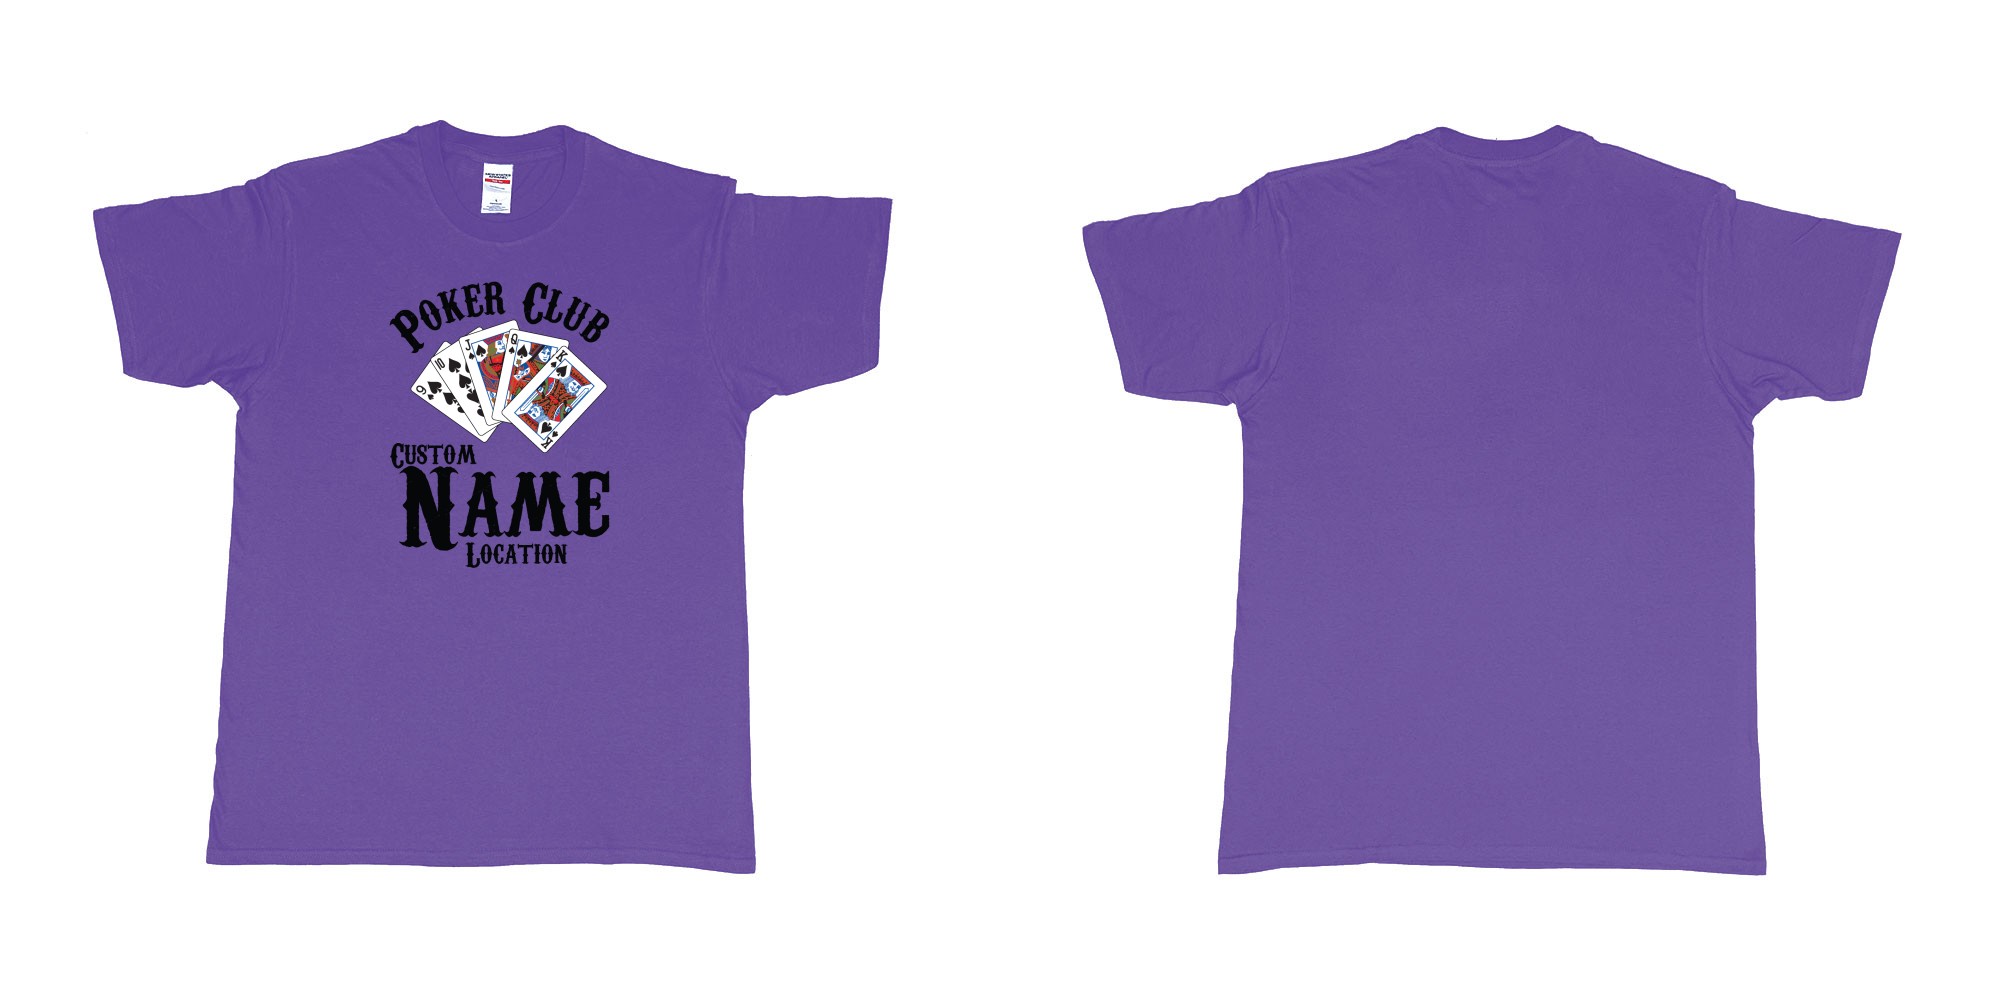 Custom tshirt design poker club custom name location design royal flush spades in fabric color purple choice your own text made in Bali by The Pirate Way